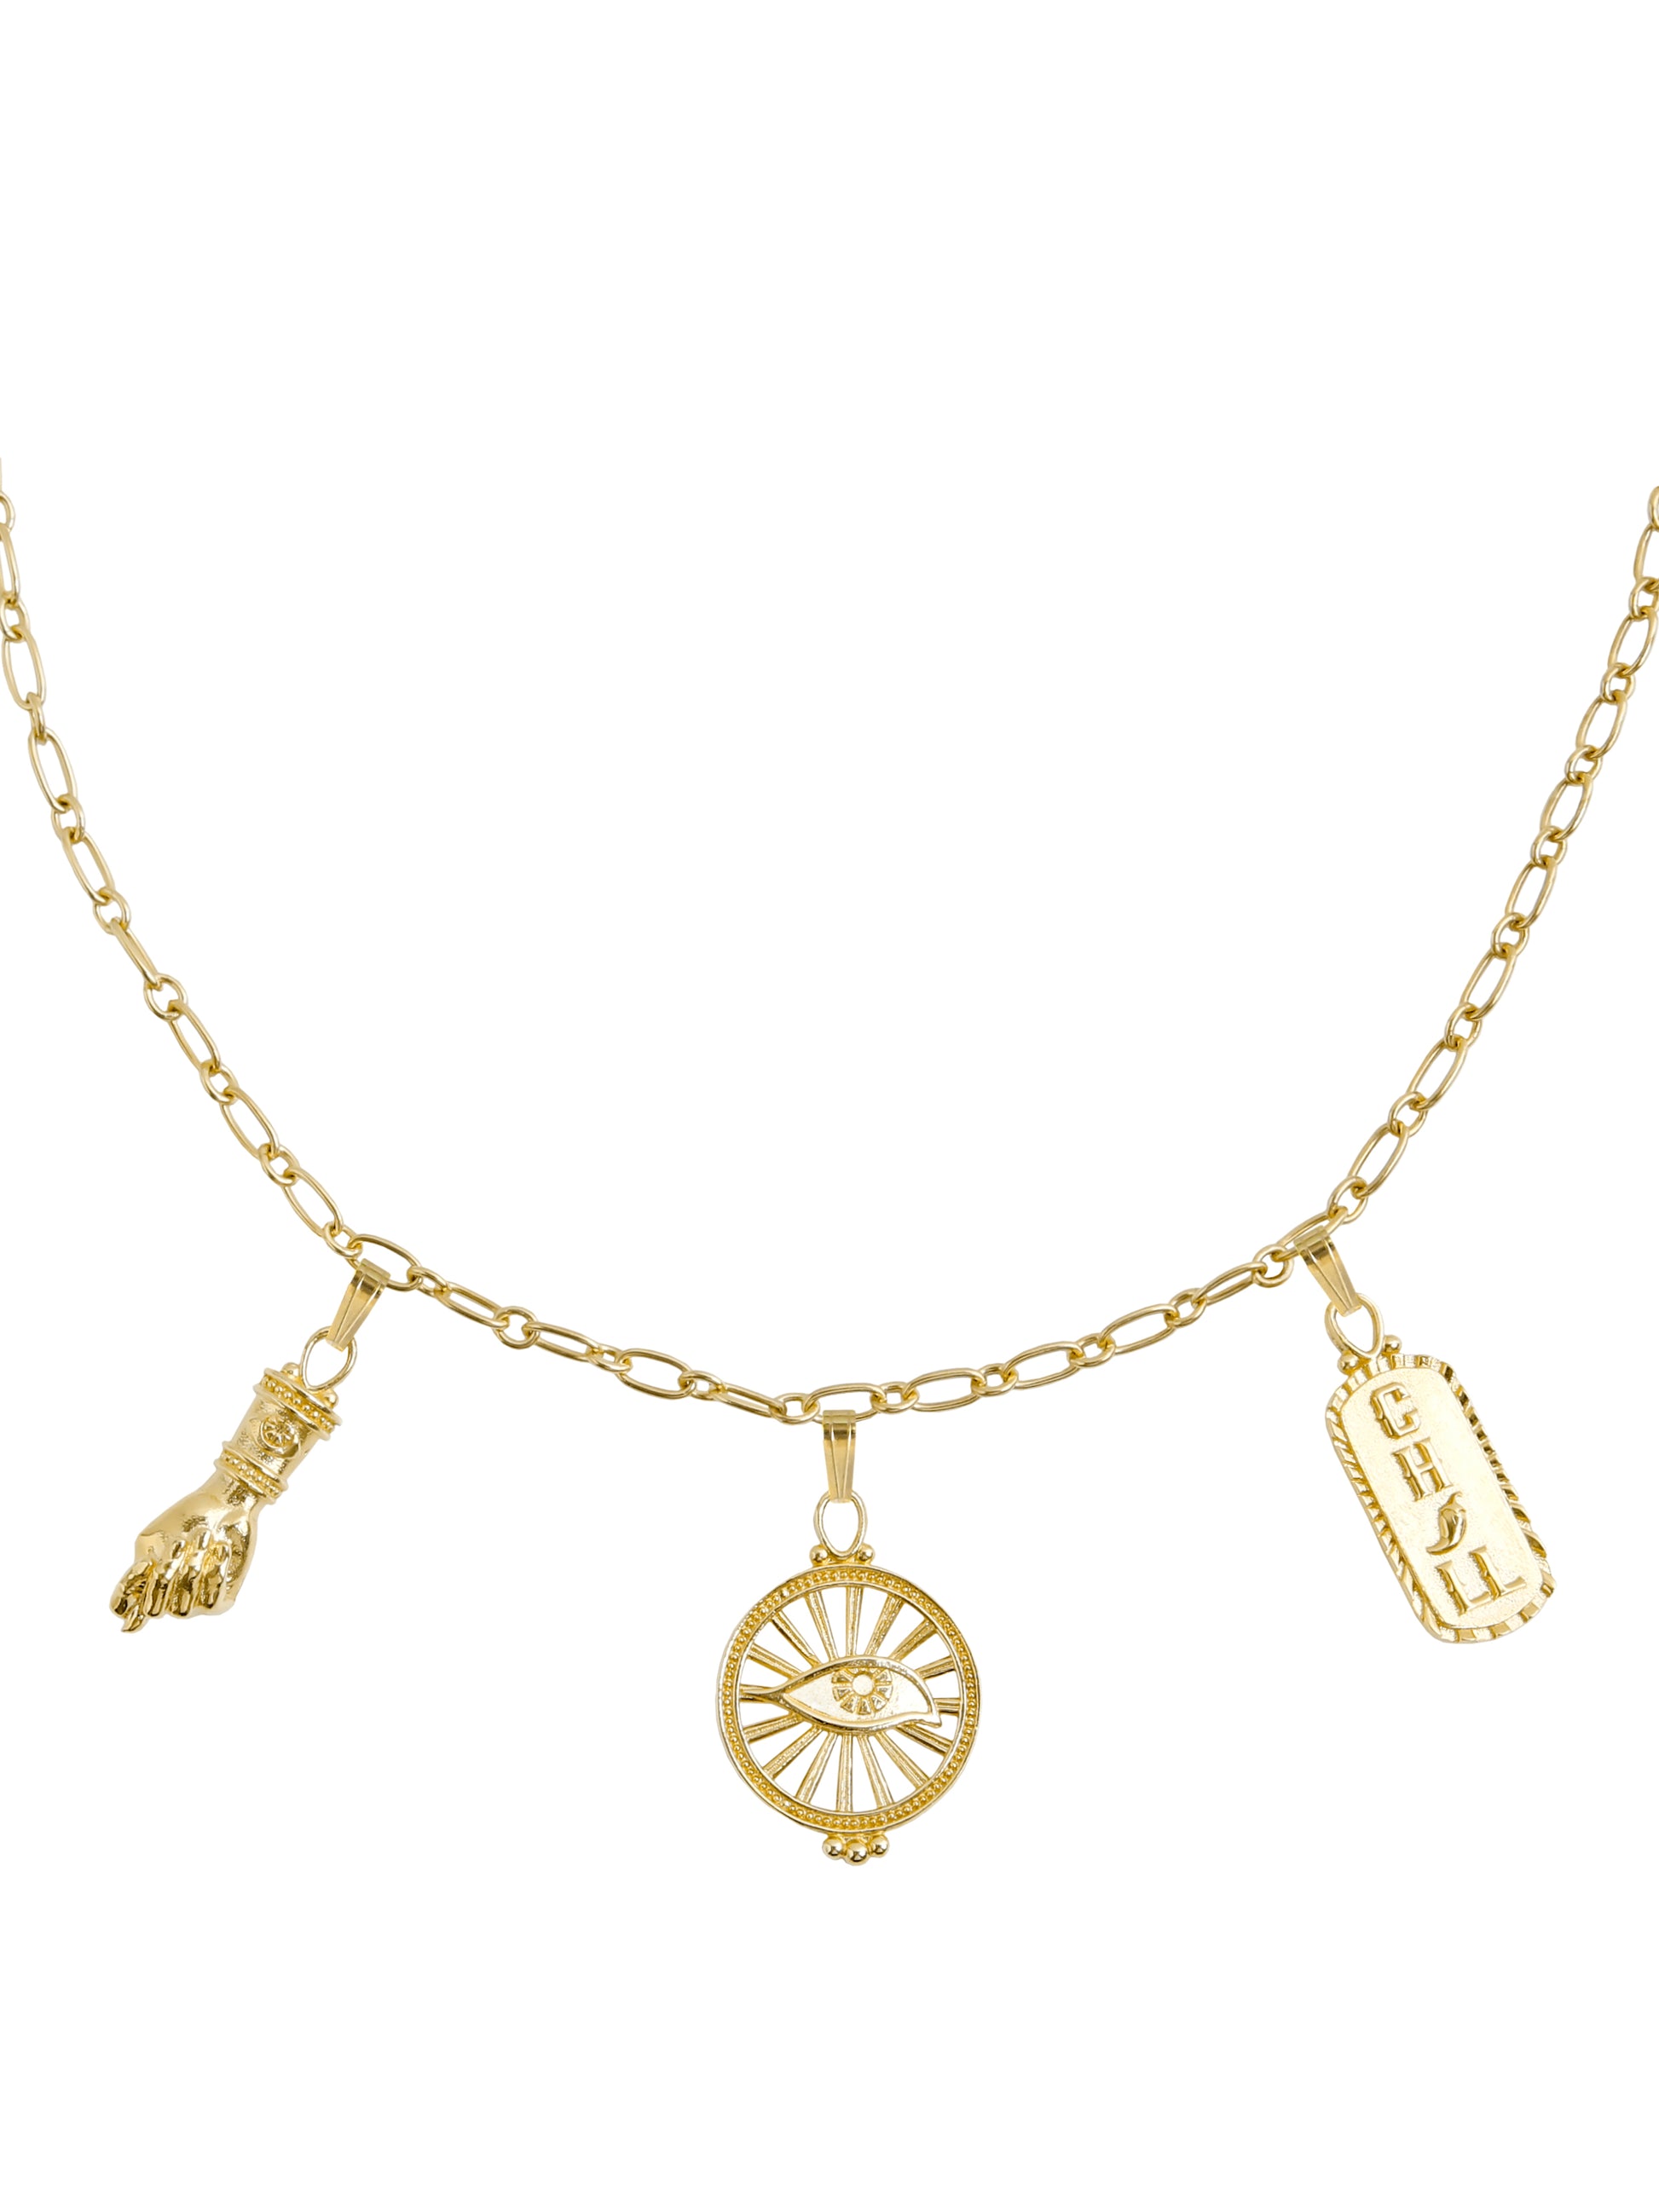 Talisman Necklace, Featuring three powerful talismans. Gold plated Silver. Gender Neutral